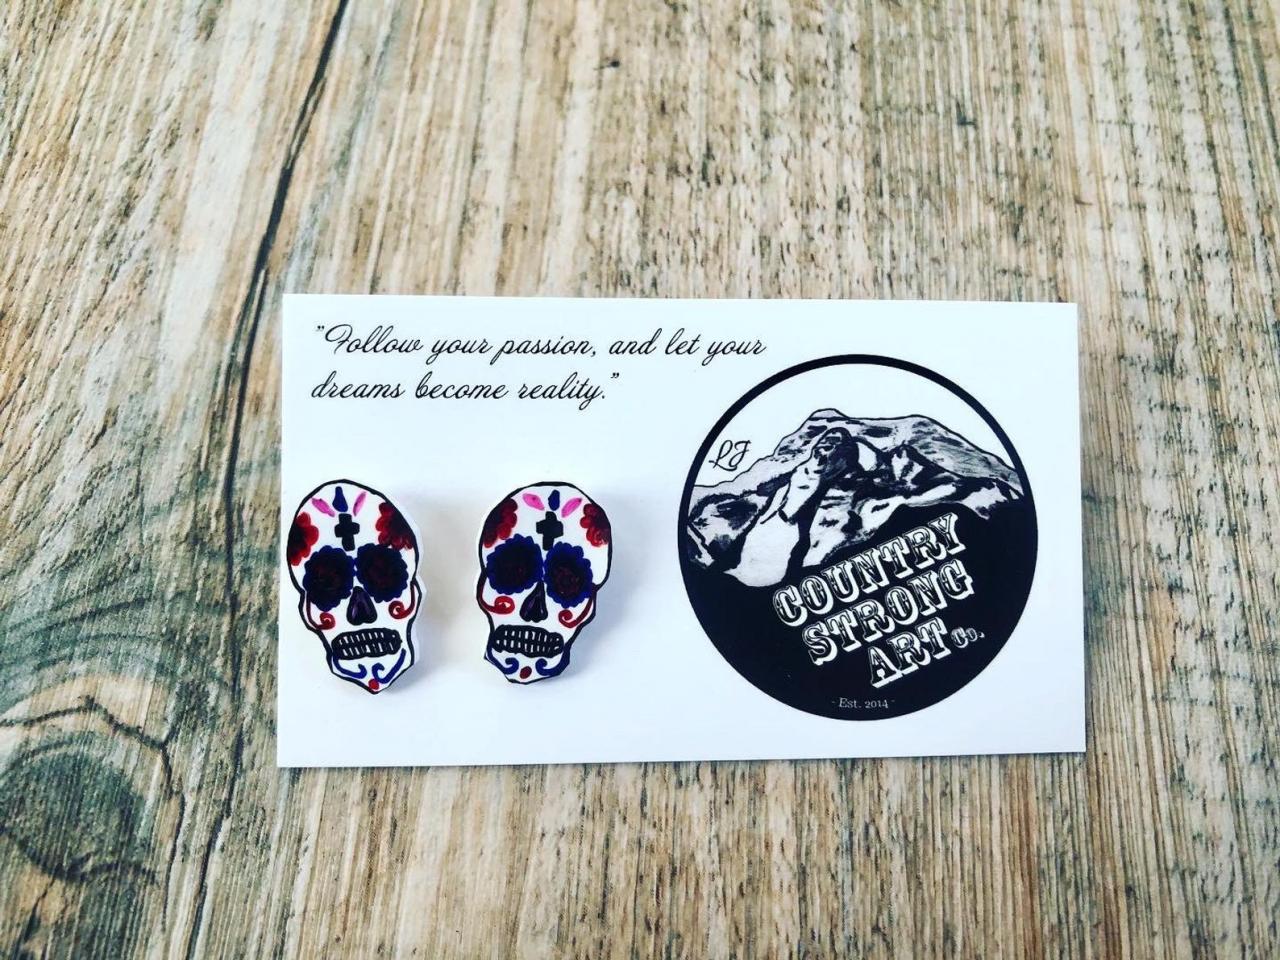 Mexican Sugar Skull Earrings, day of the dead studs, halloween studs- halloween jewlery, skull studs